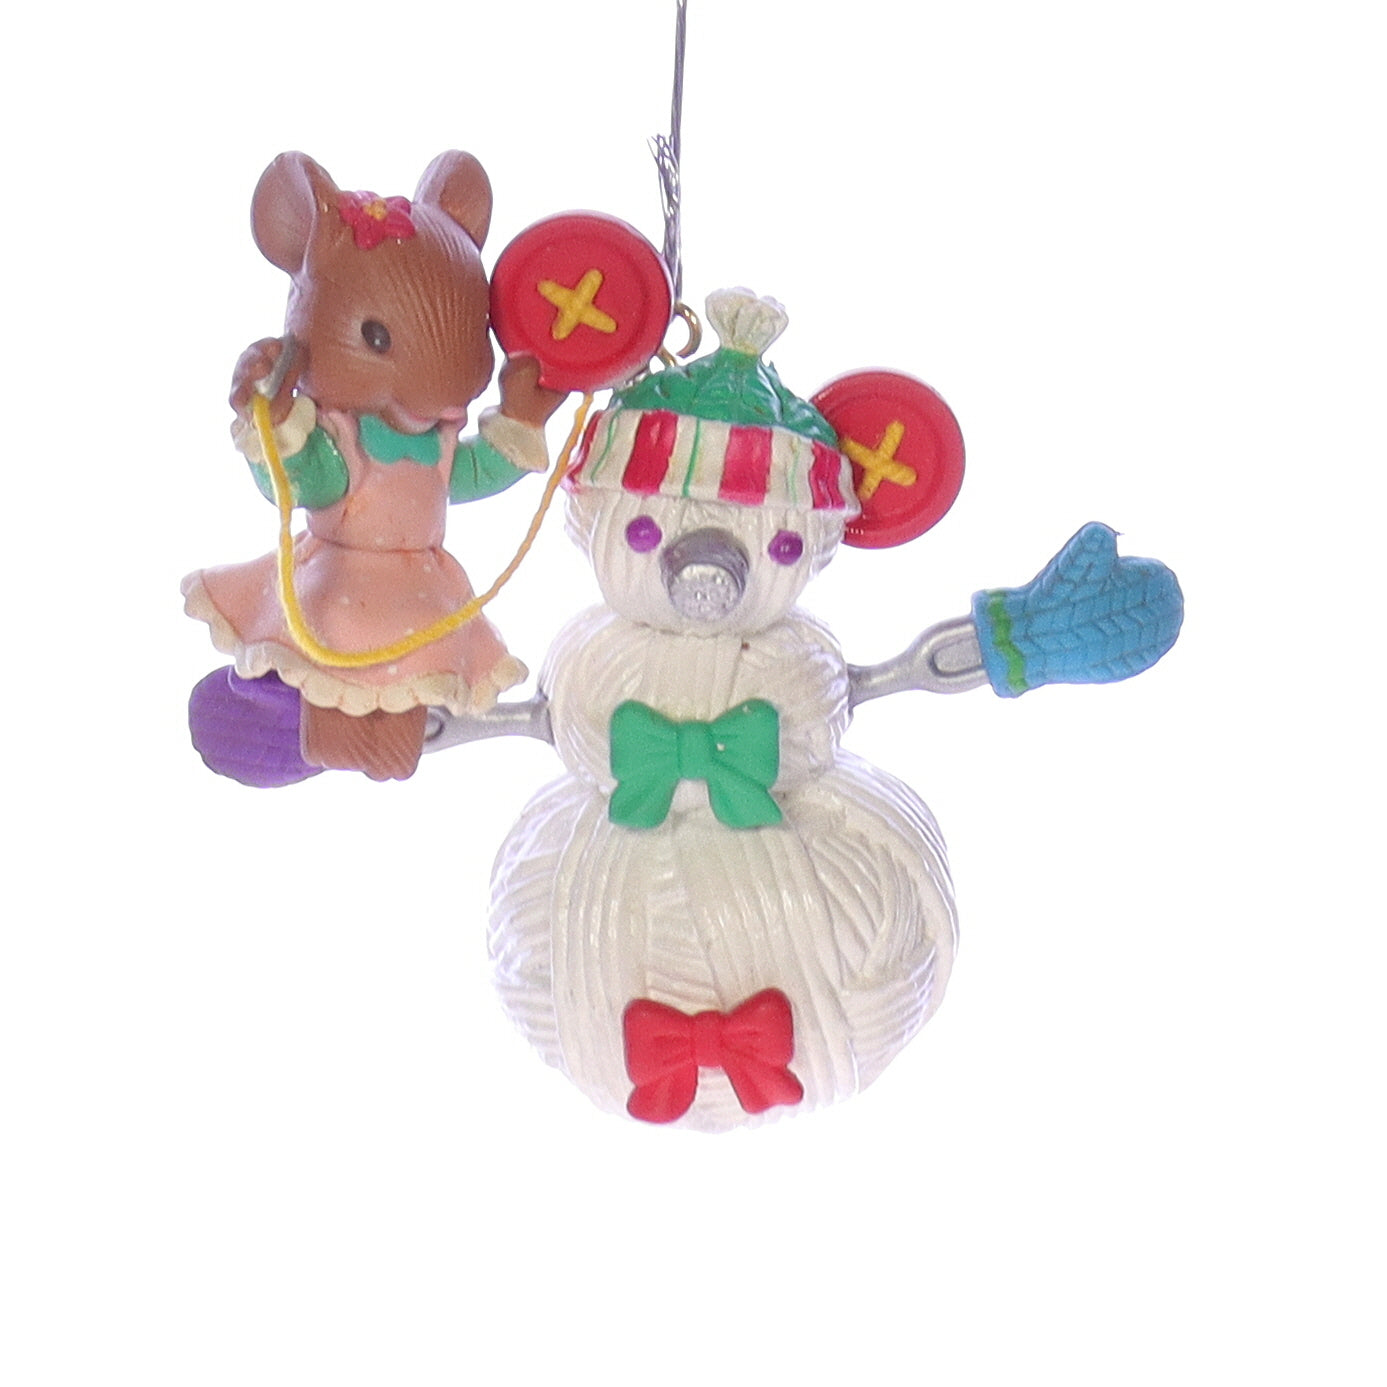 Enesco_Treasury_of_Christmas_Ornaments_599042_Building_a_Sew-man_Christmas_Ornament_1994 Front View